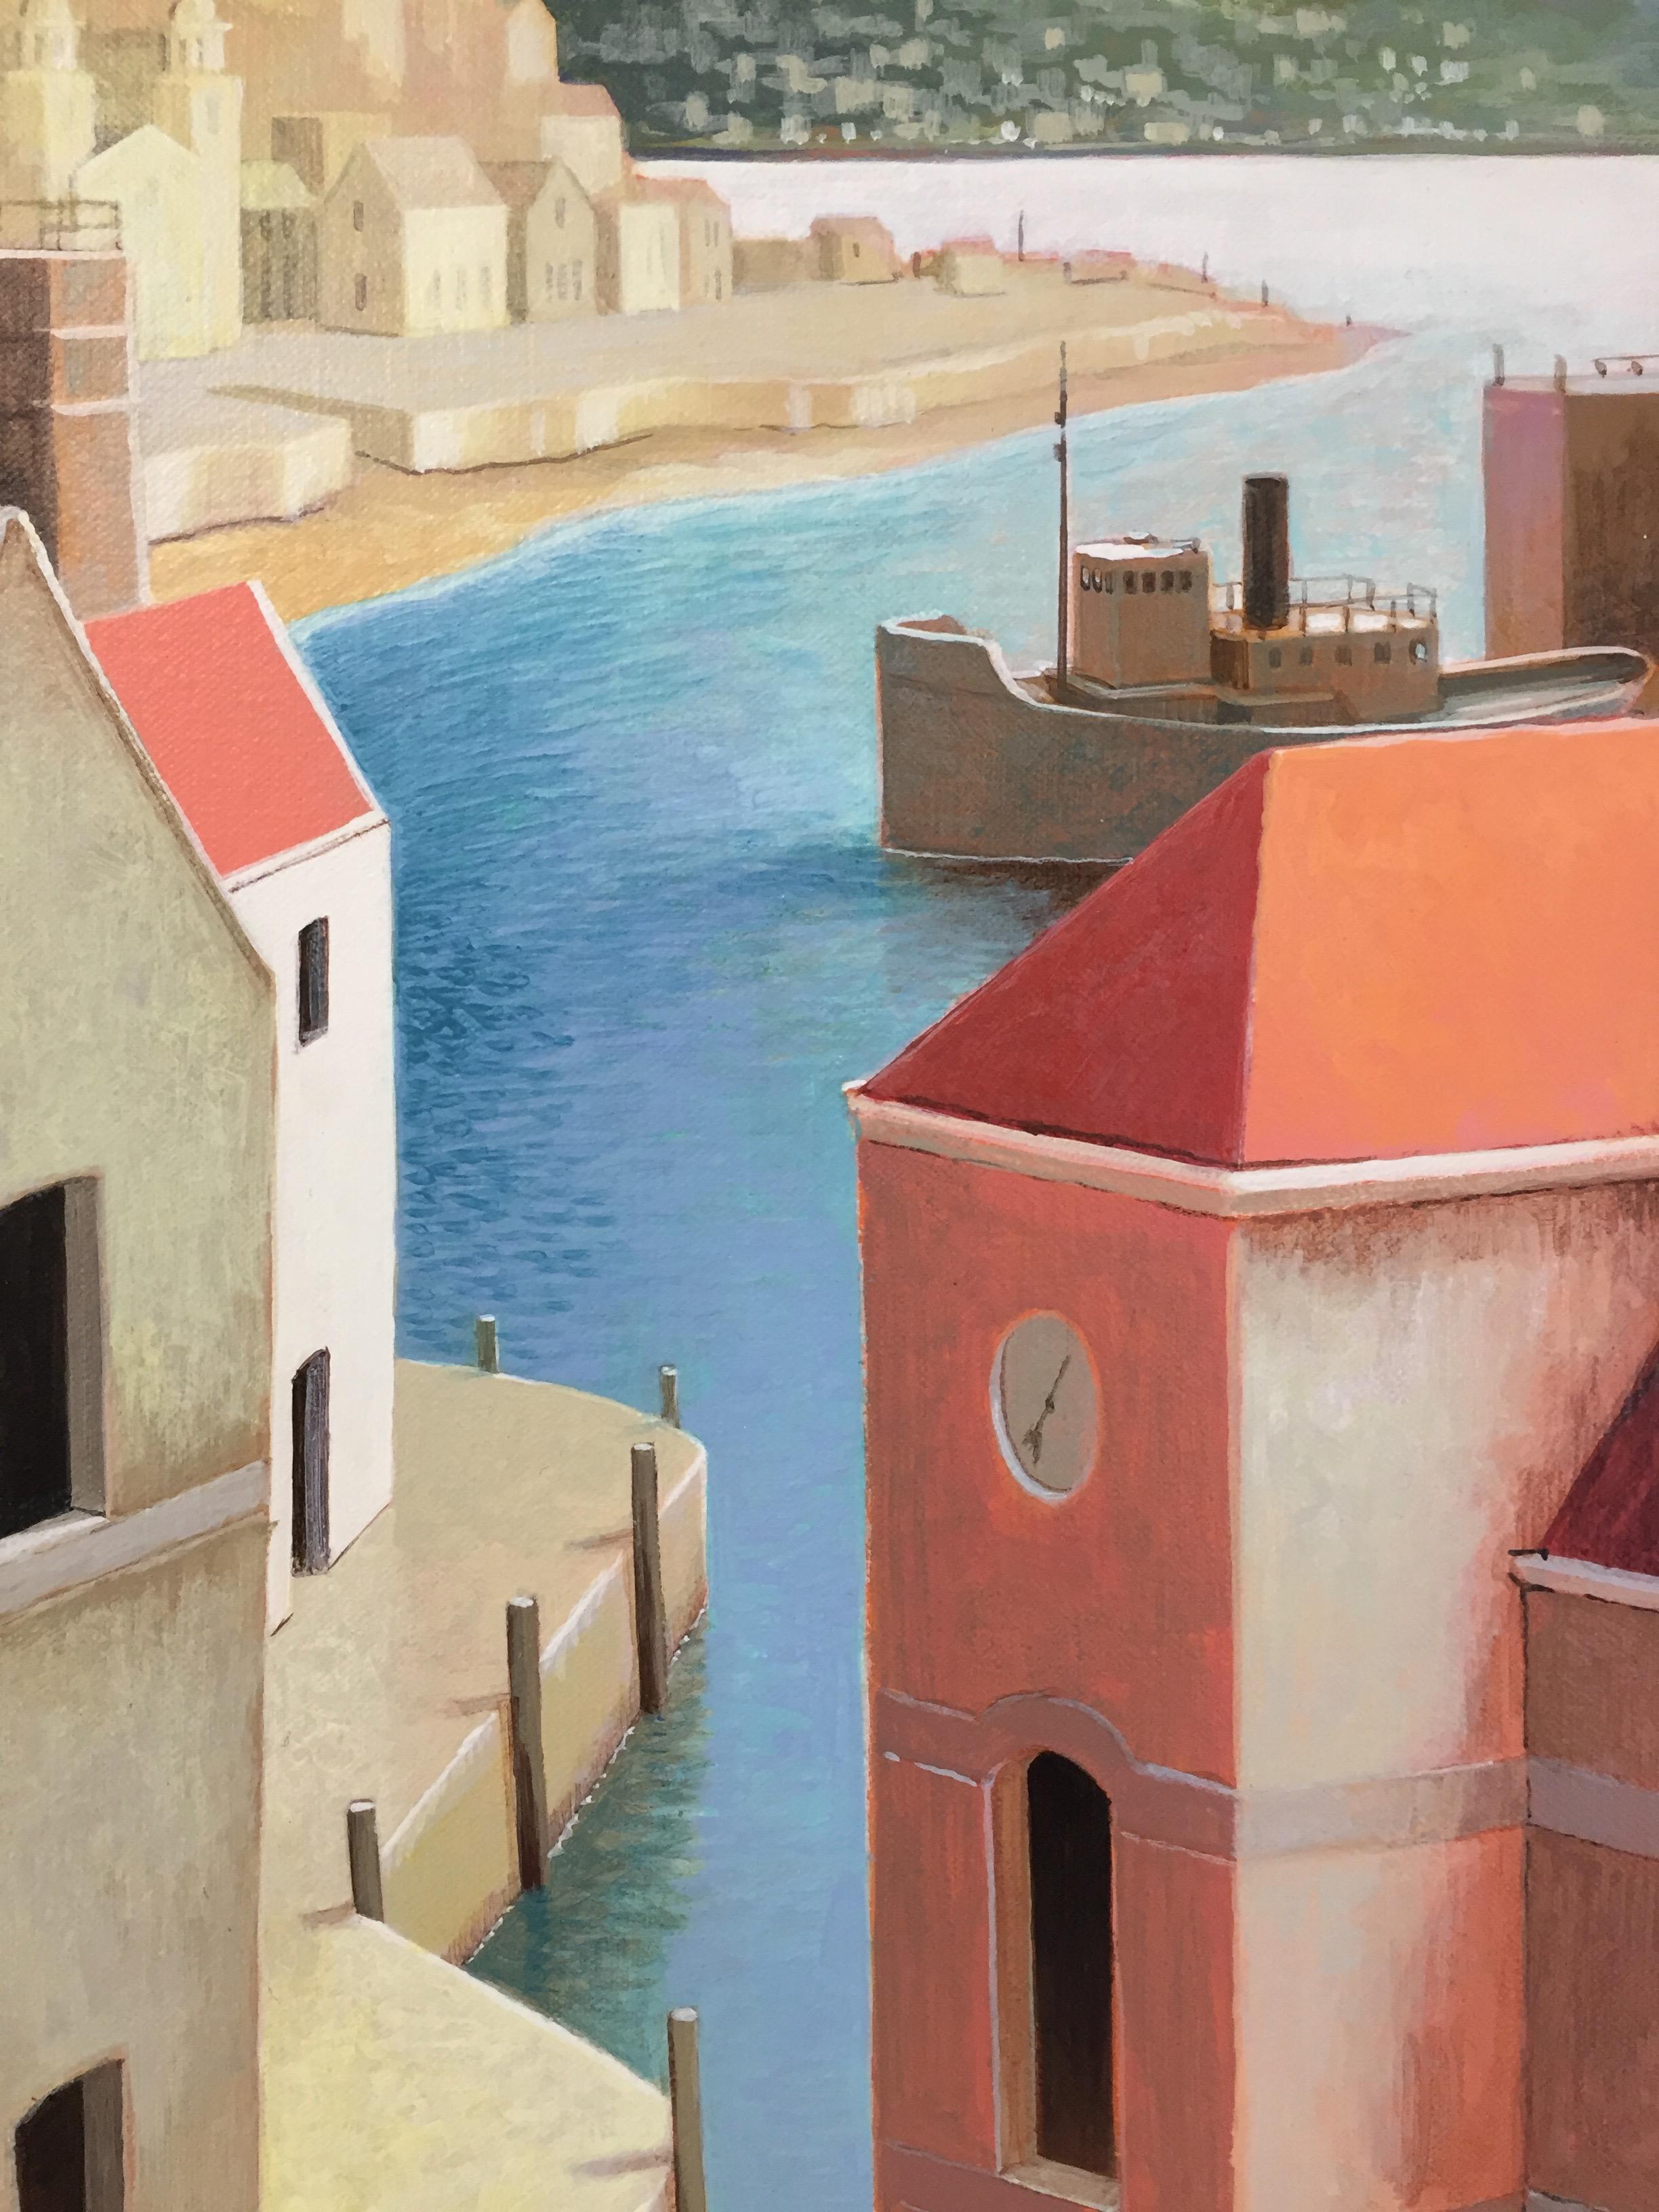 A warm afternoon- 21st Century, contemporary painting of a Mediterranean Port  - Contemporary Painting by Michiel Schrijver